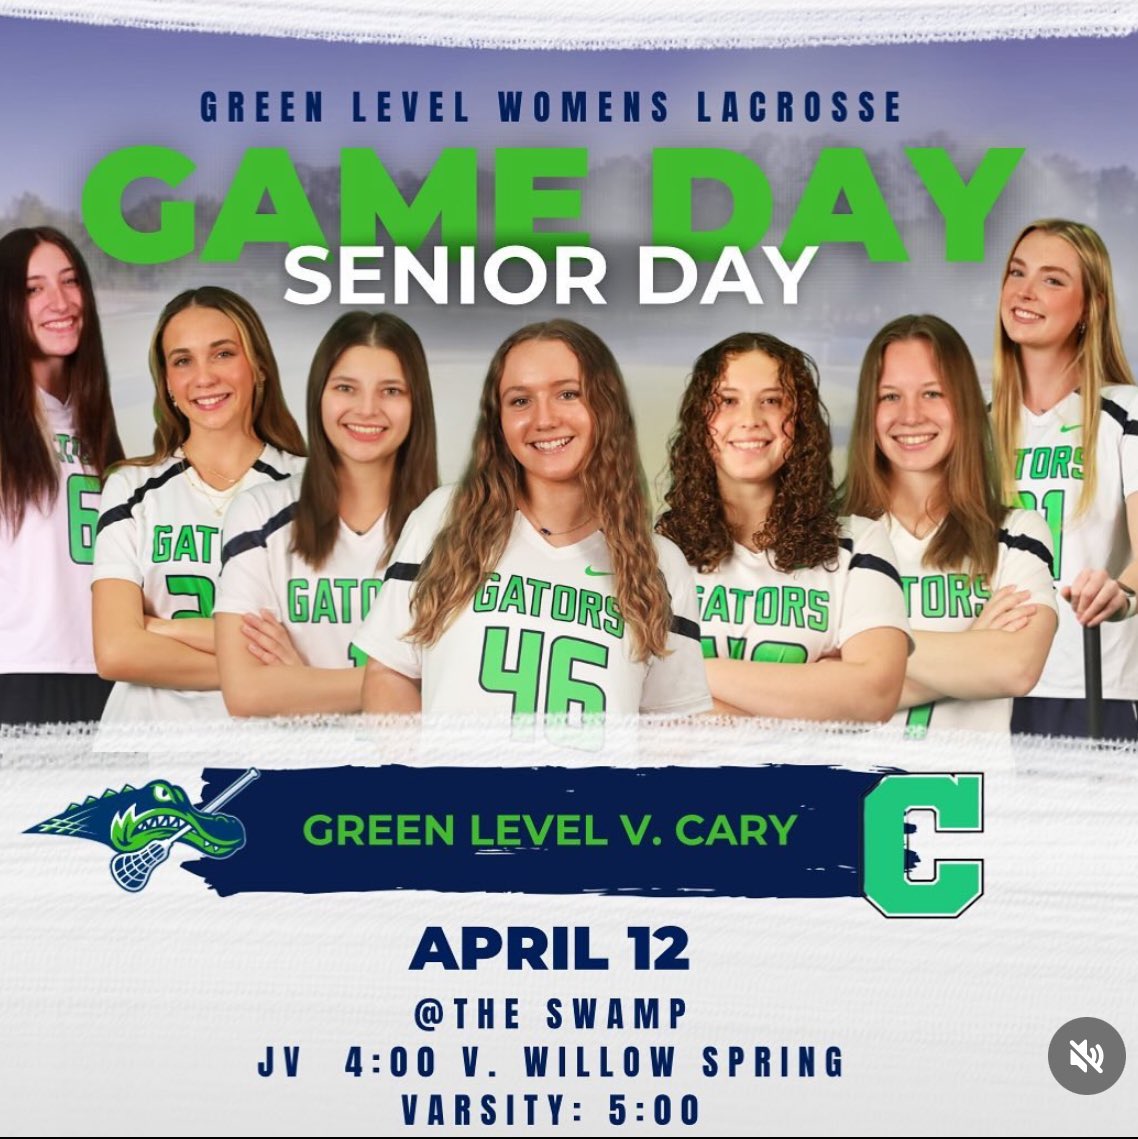 Tonight we celebrate our Seven Super Seniors. Join us as we honor their dedication to our program! We are proud of each of you! #gotyourback #laxlife @G_L_ATHLETICS @G_L_BOOSTERS